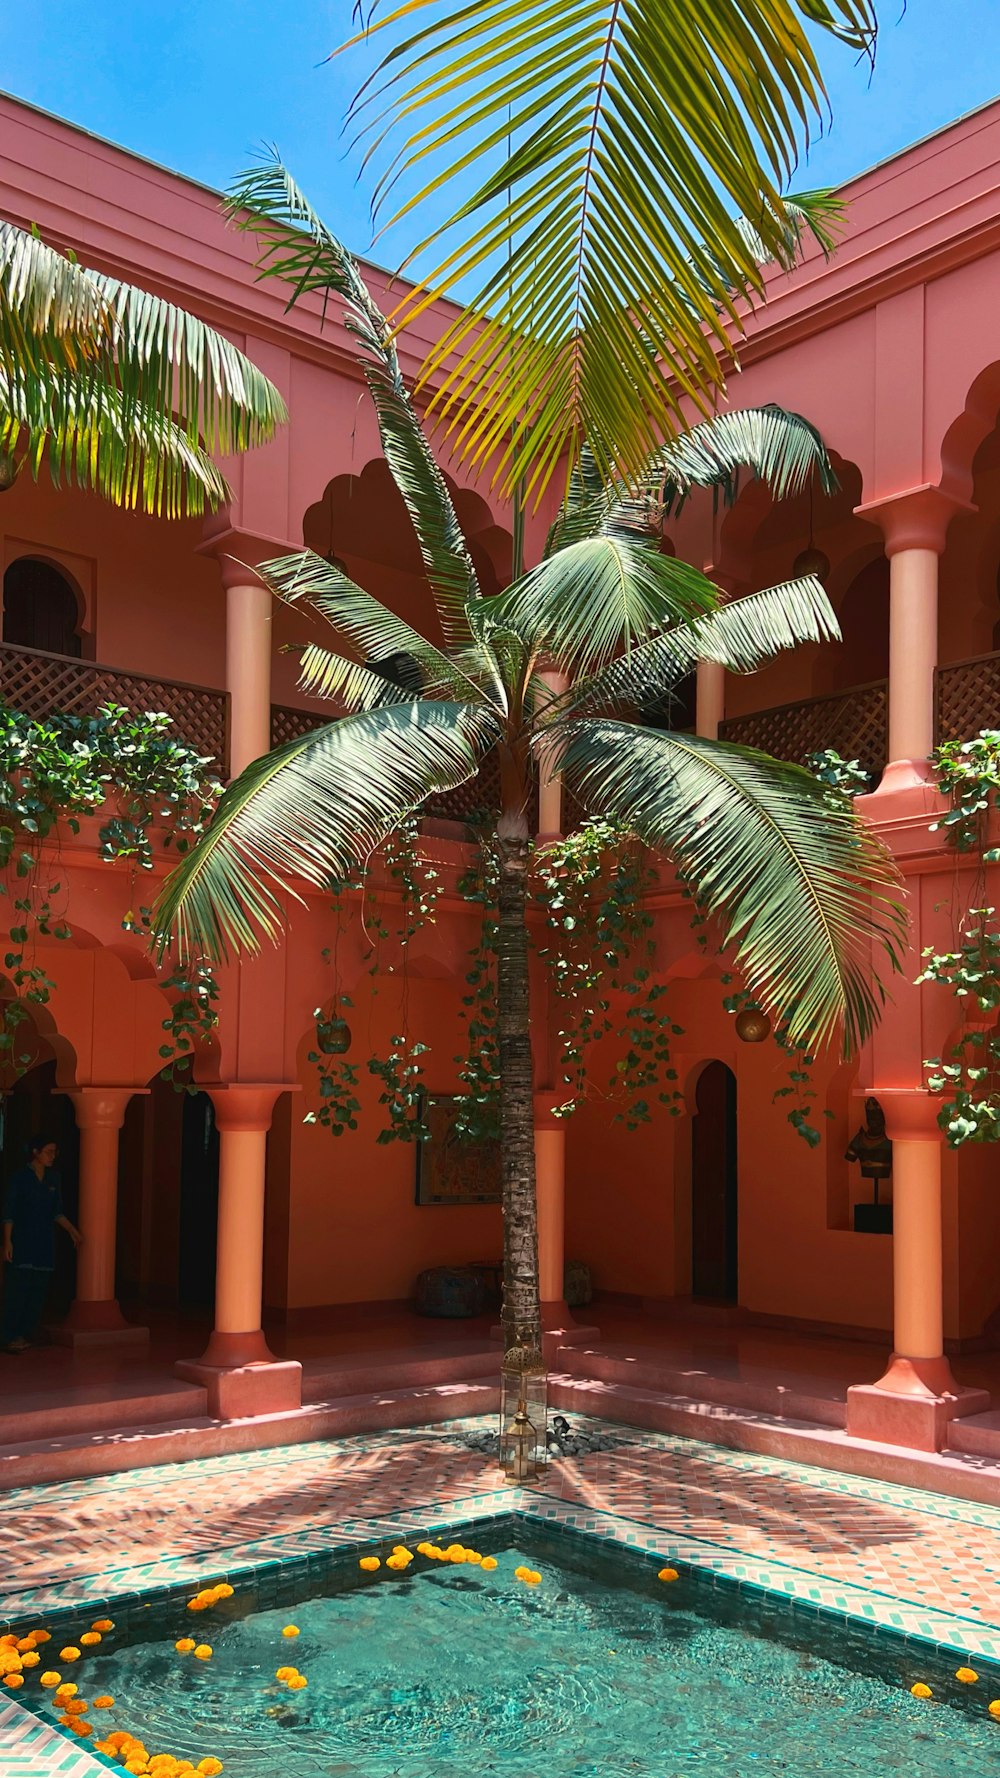 a palm tree in a courtyard of a building